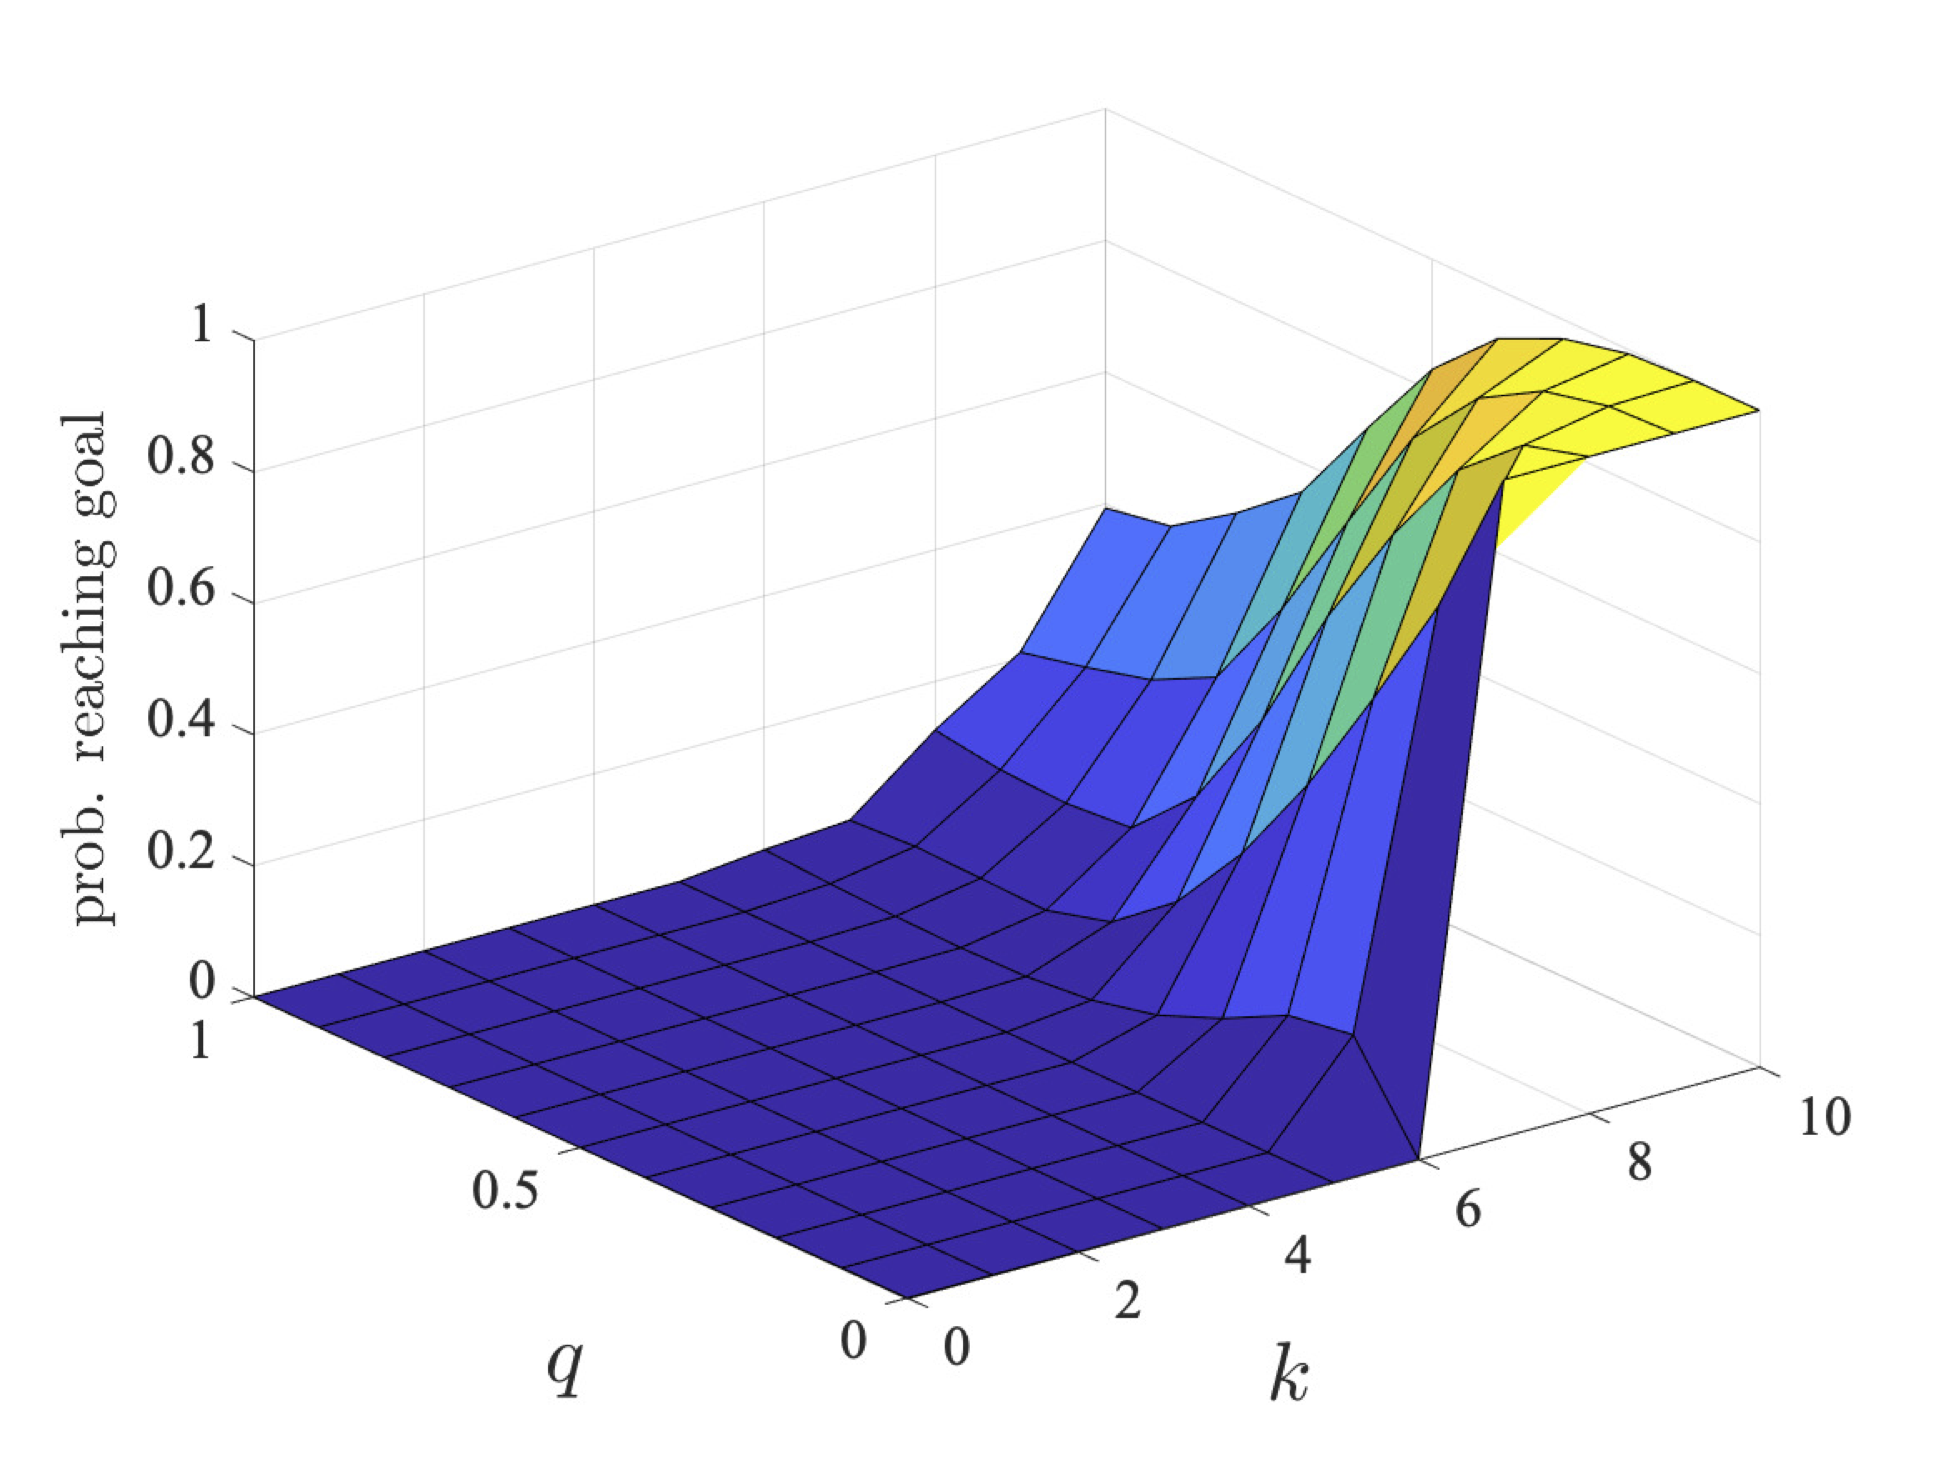 plot: maximum probability robot 2 can ensure they reach their goal within a deadline (l=7)